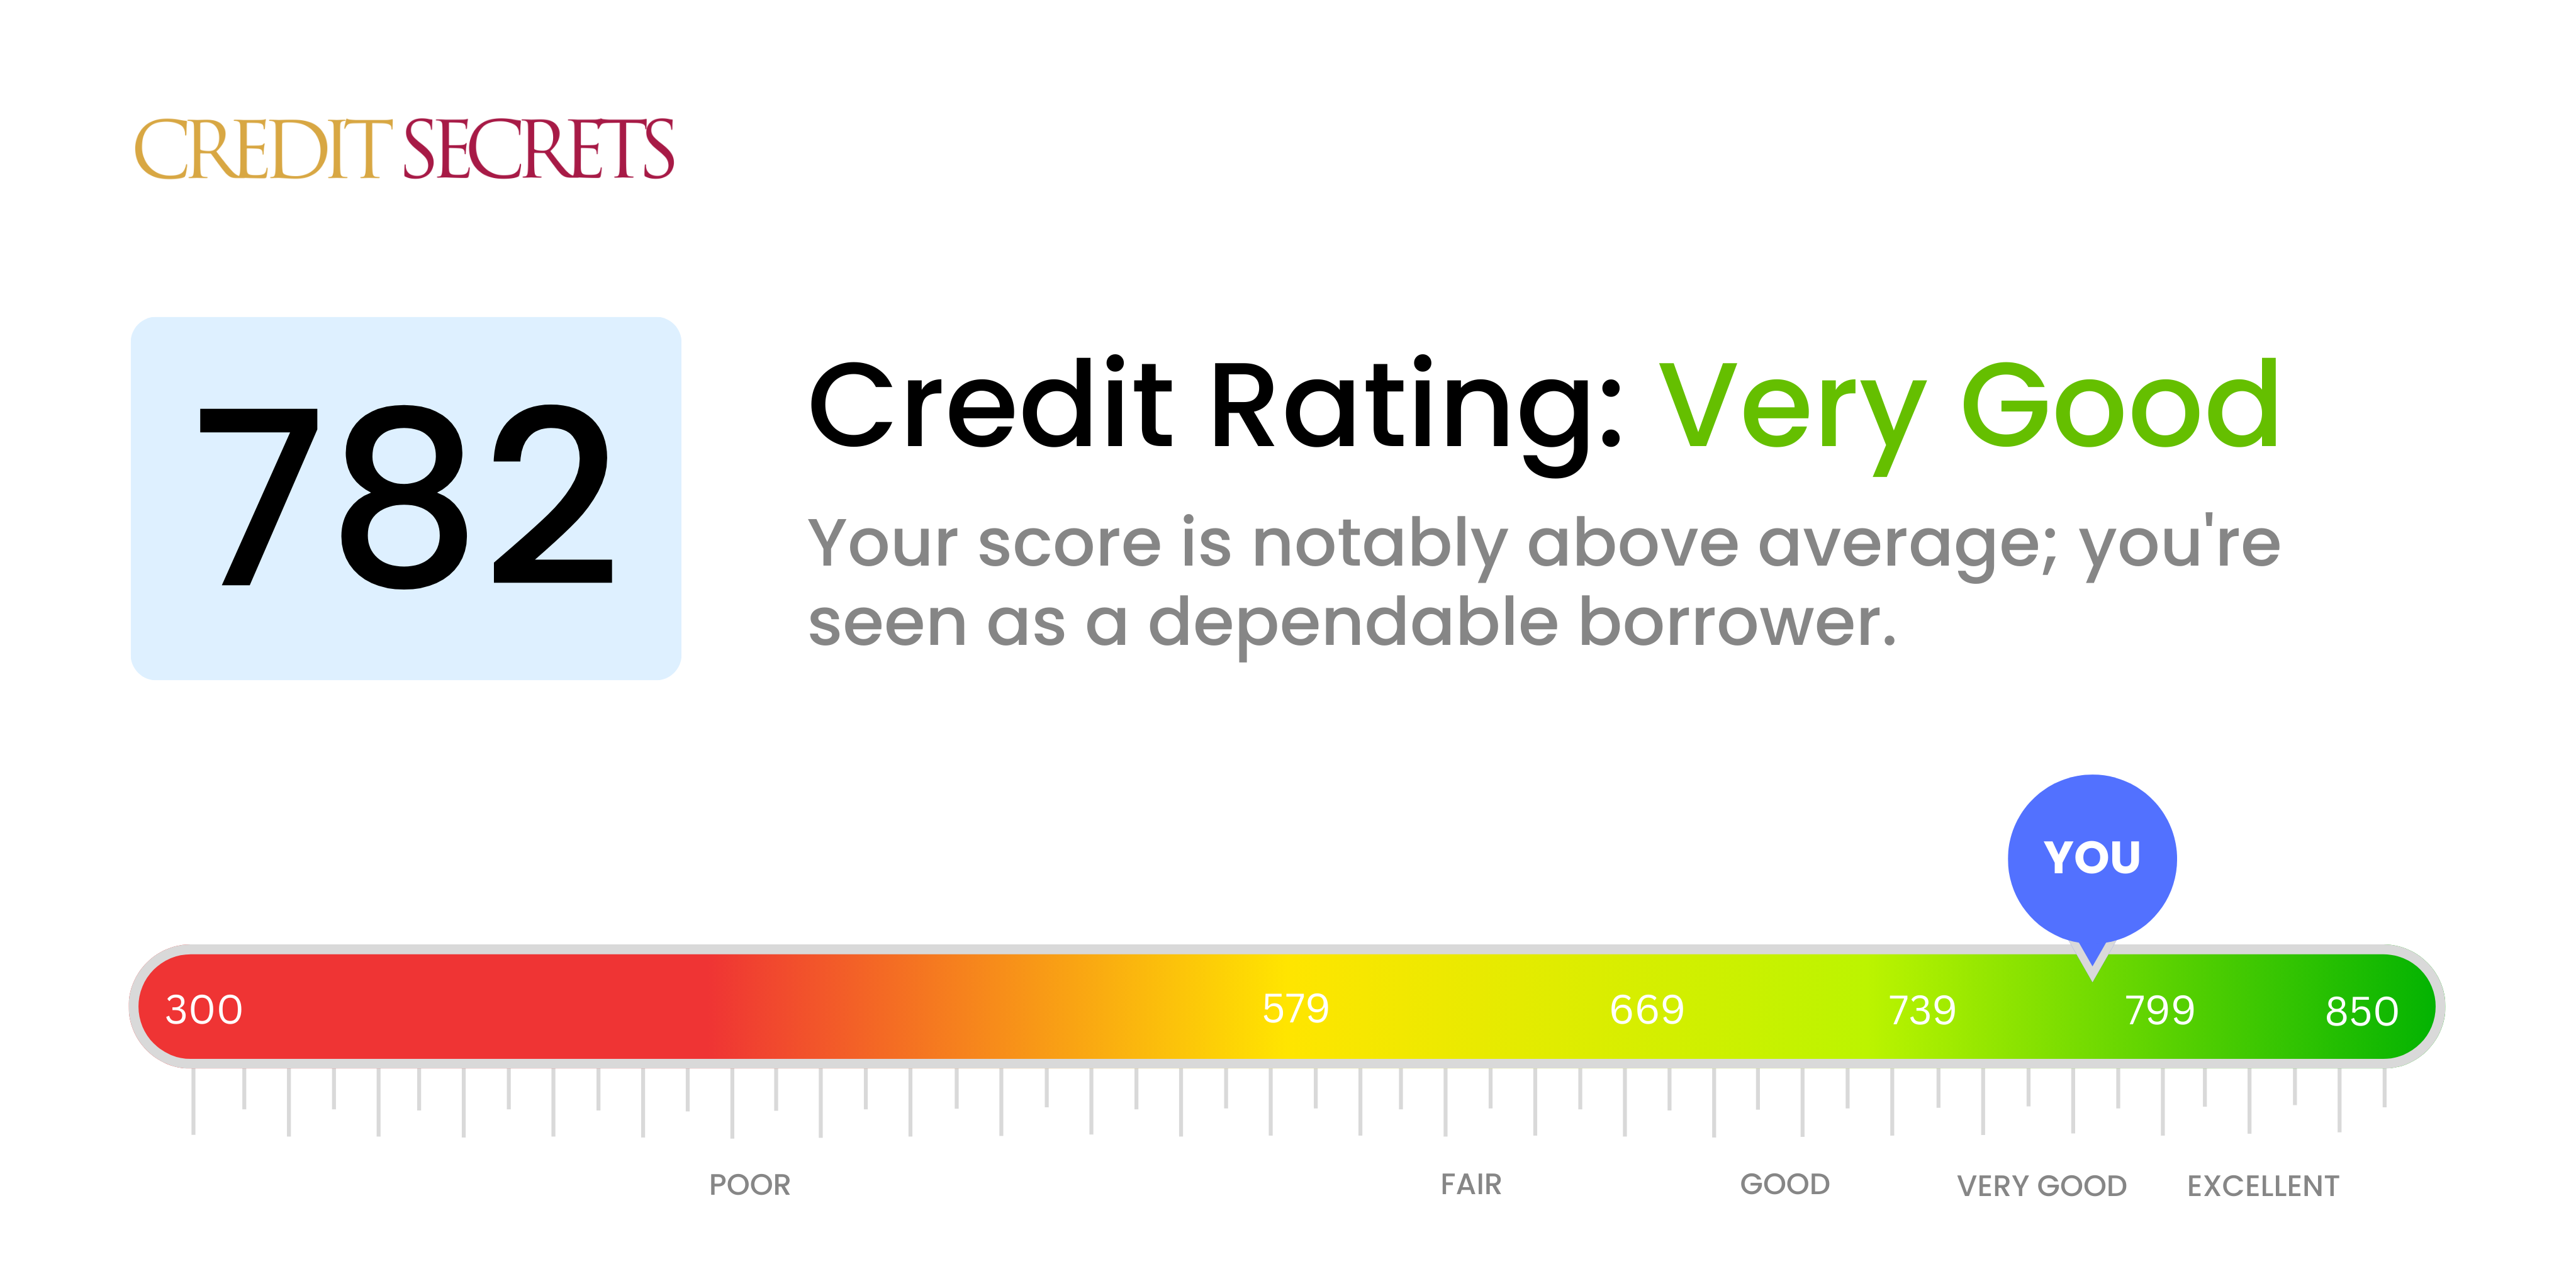 Is 782 a good credit score?